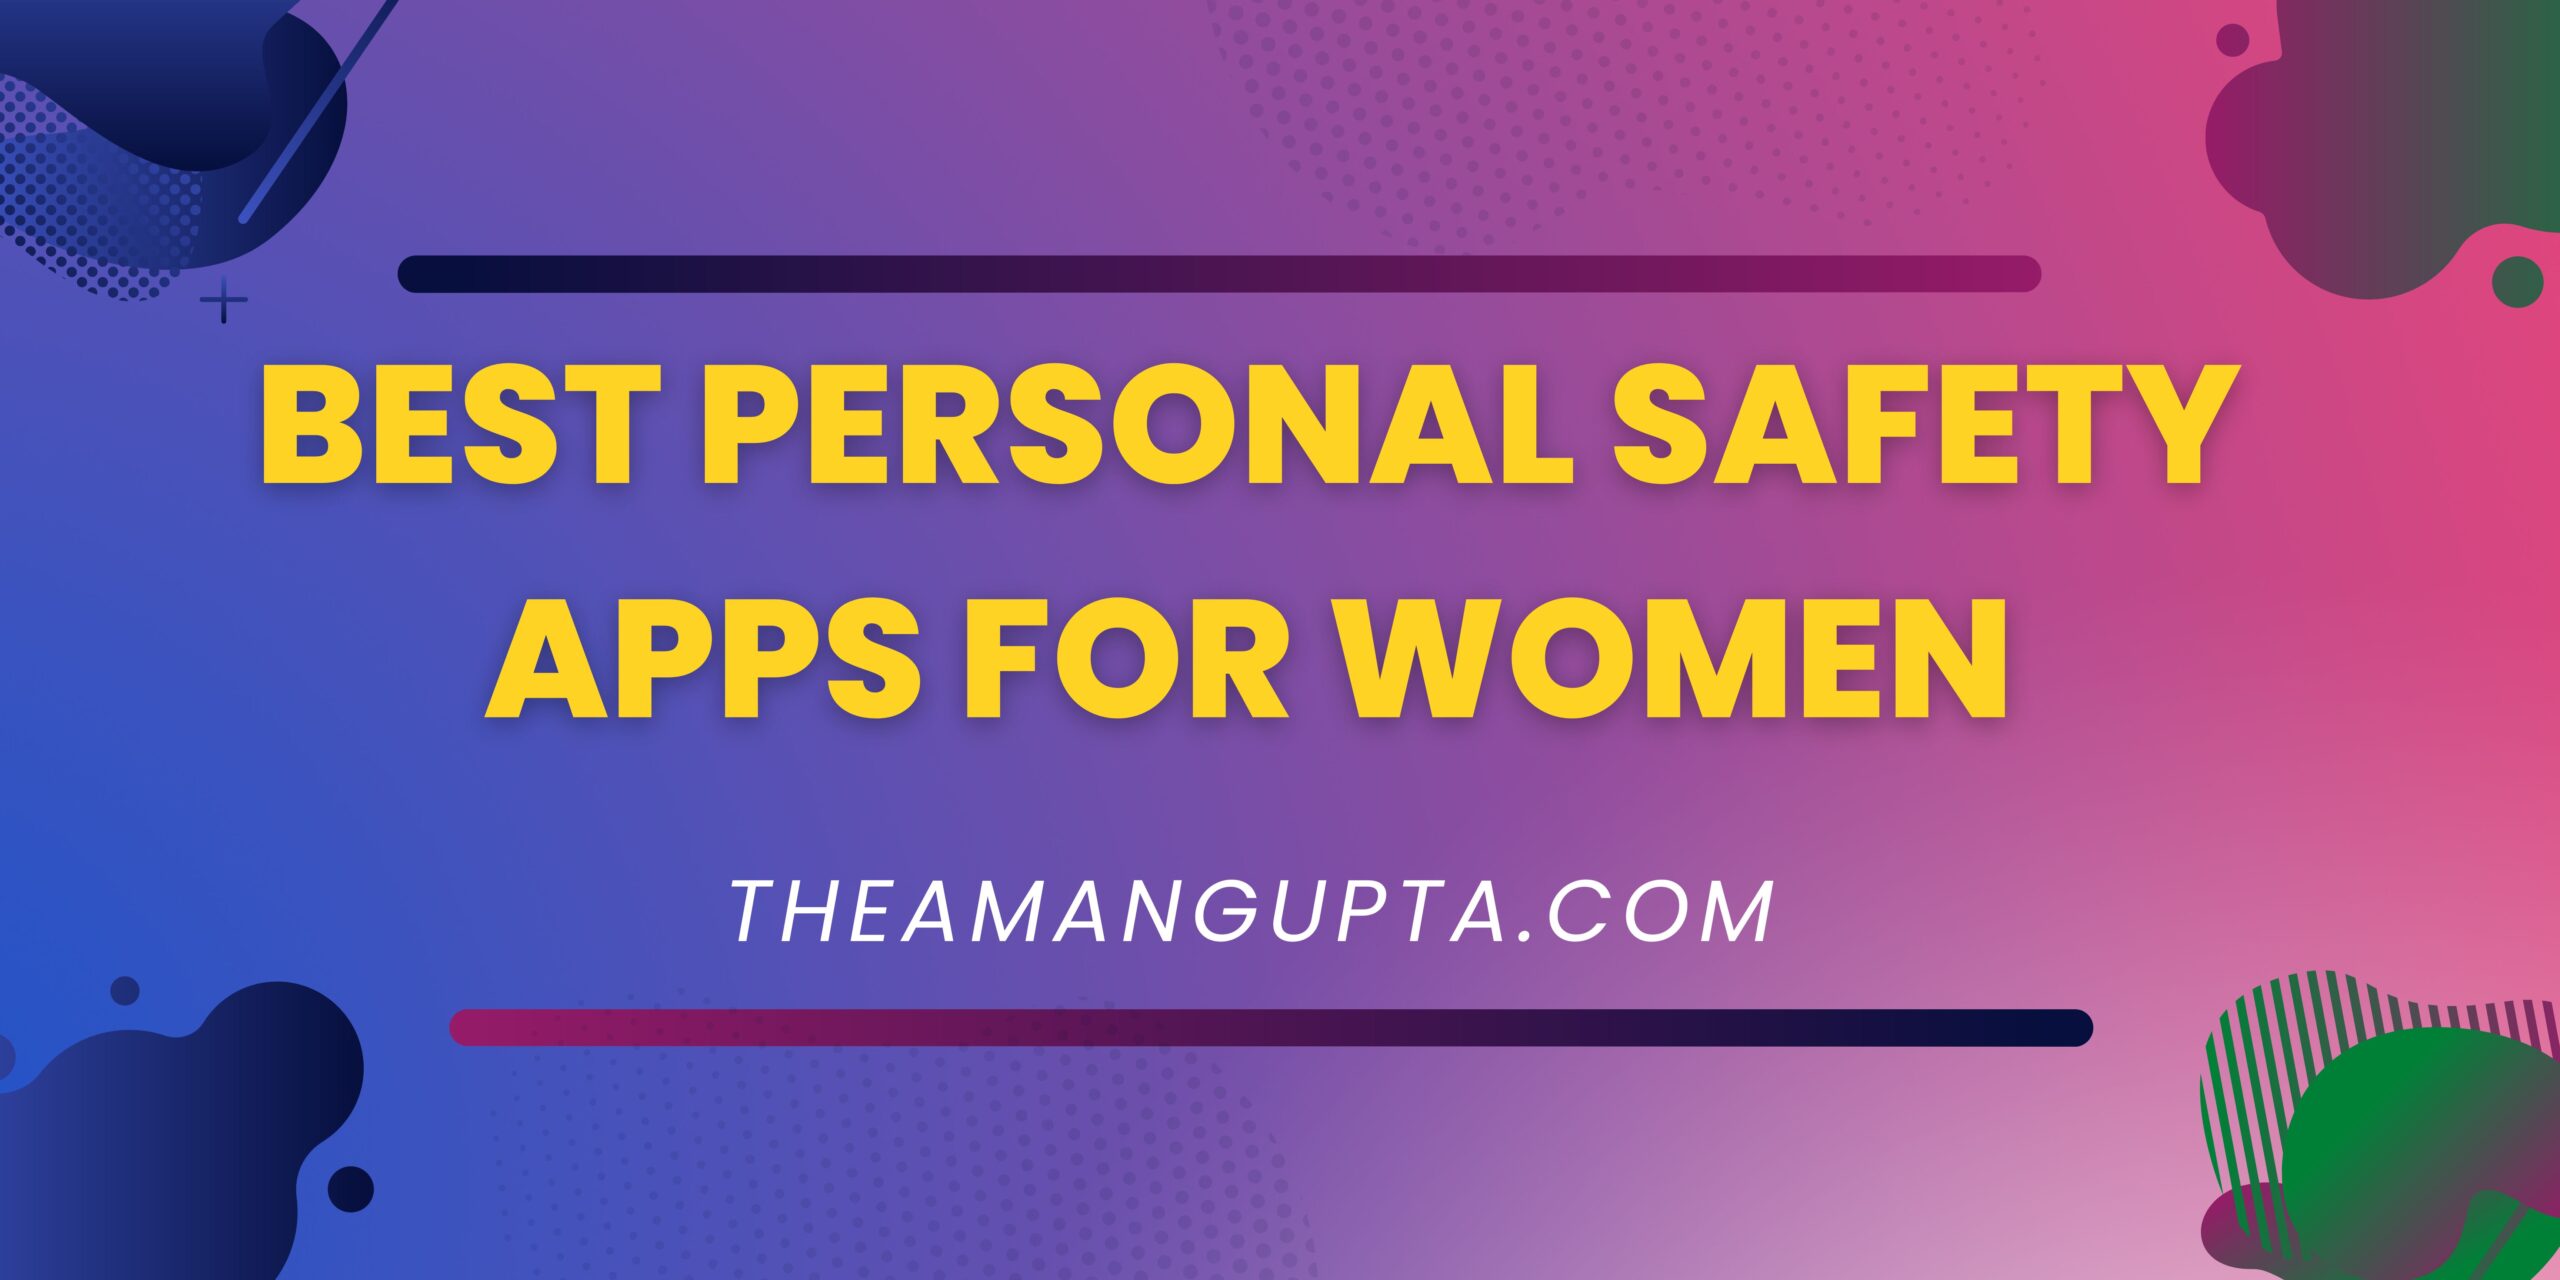 Best Personal Safety Apps For Women|Safety Apps For Women|Tannu Rani|Theamangupta